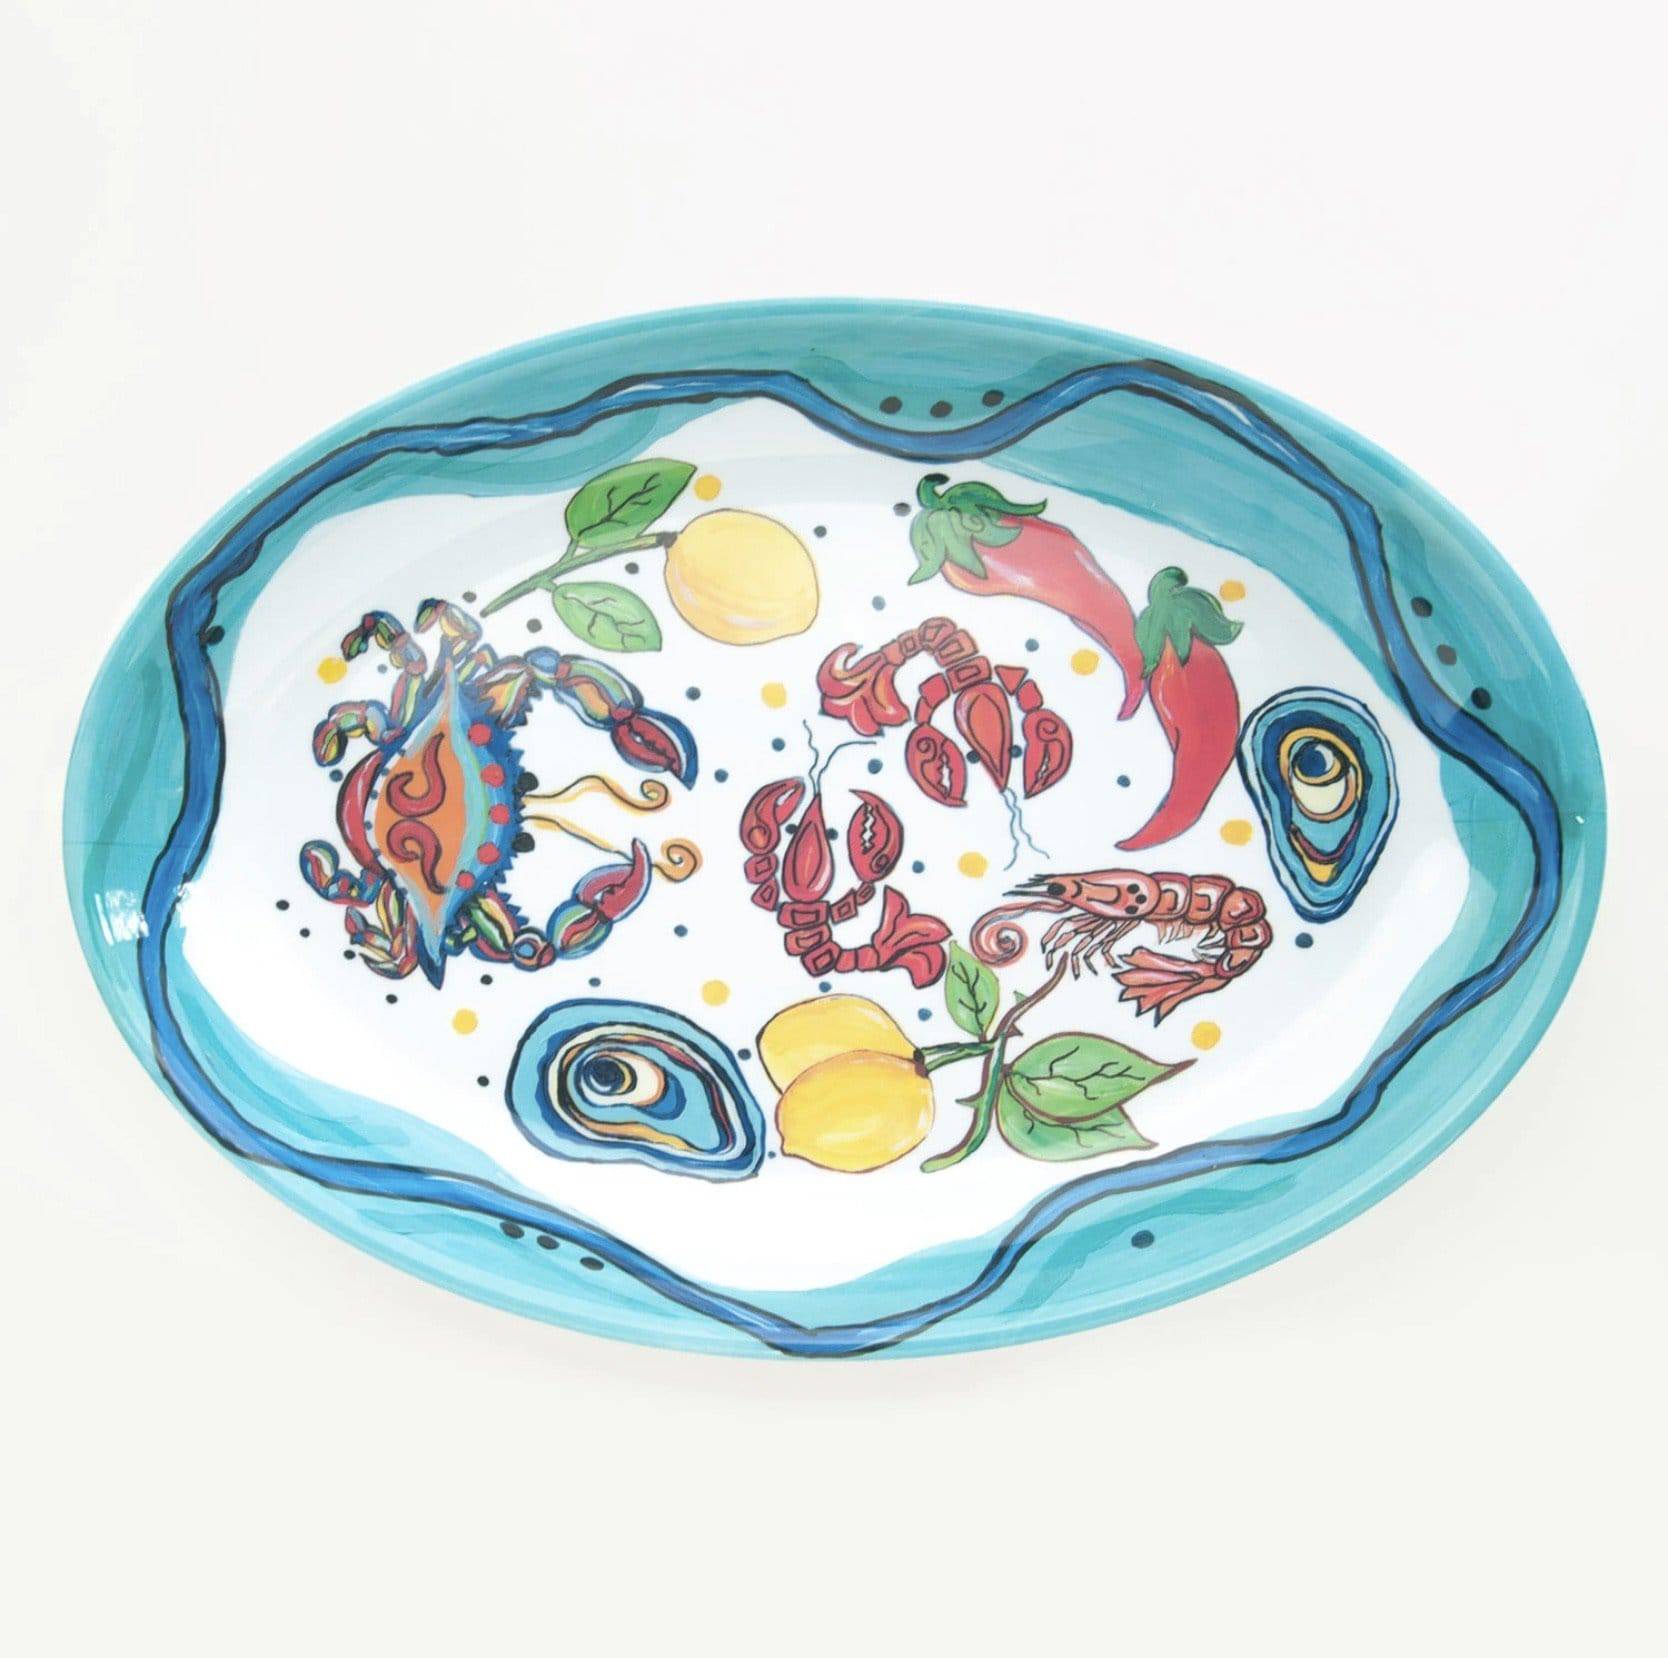 Youngberg & Co - Youngberg & Co Dana Wittmann Seafood Platter - Little Miss Muffin Children & Home